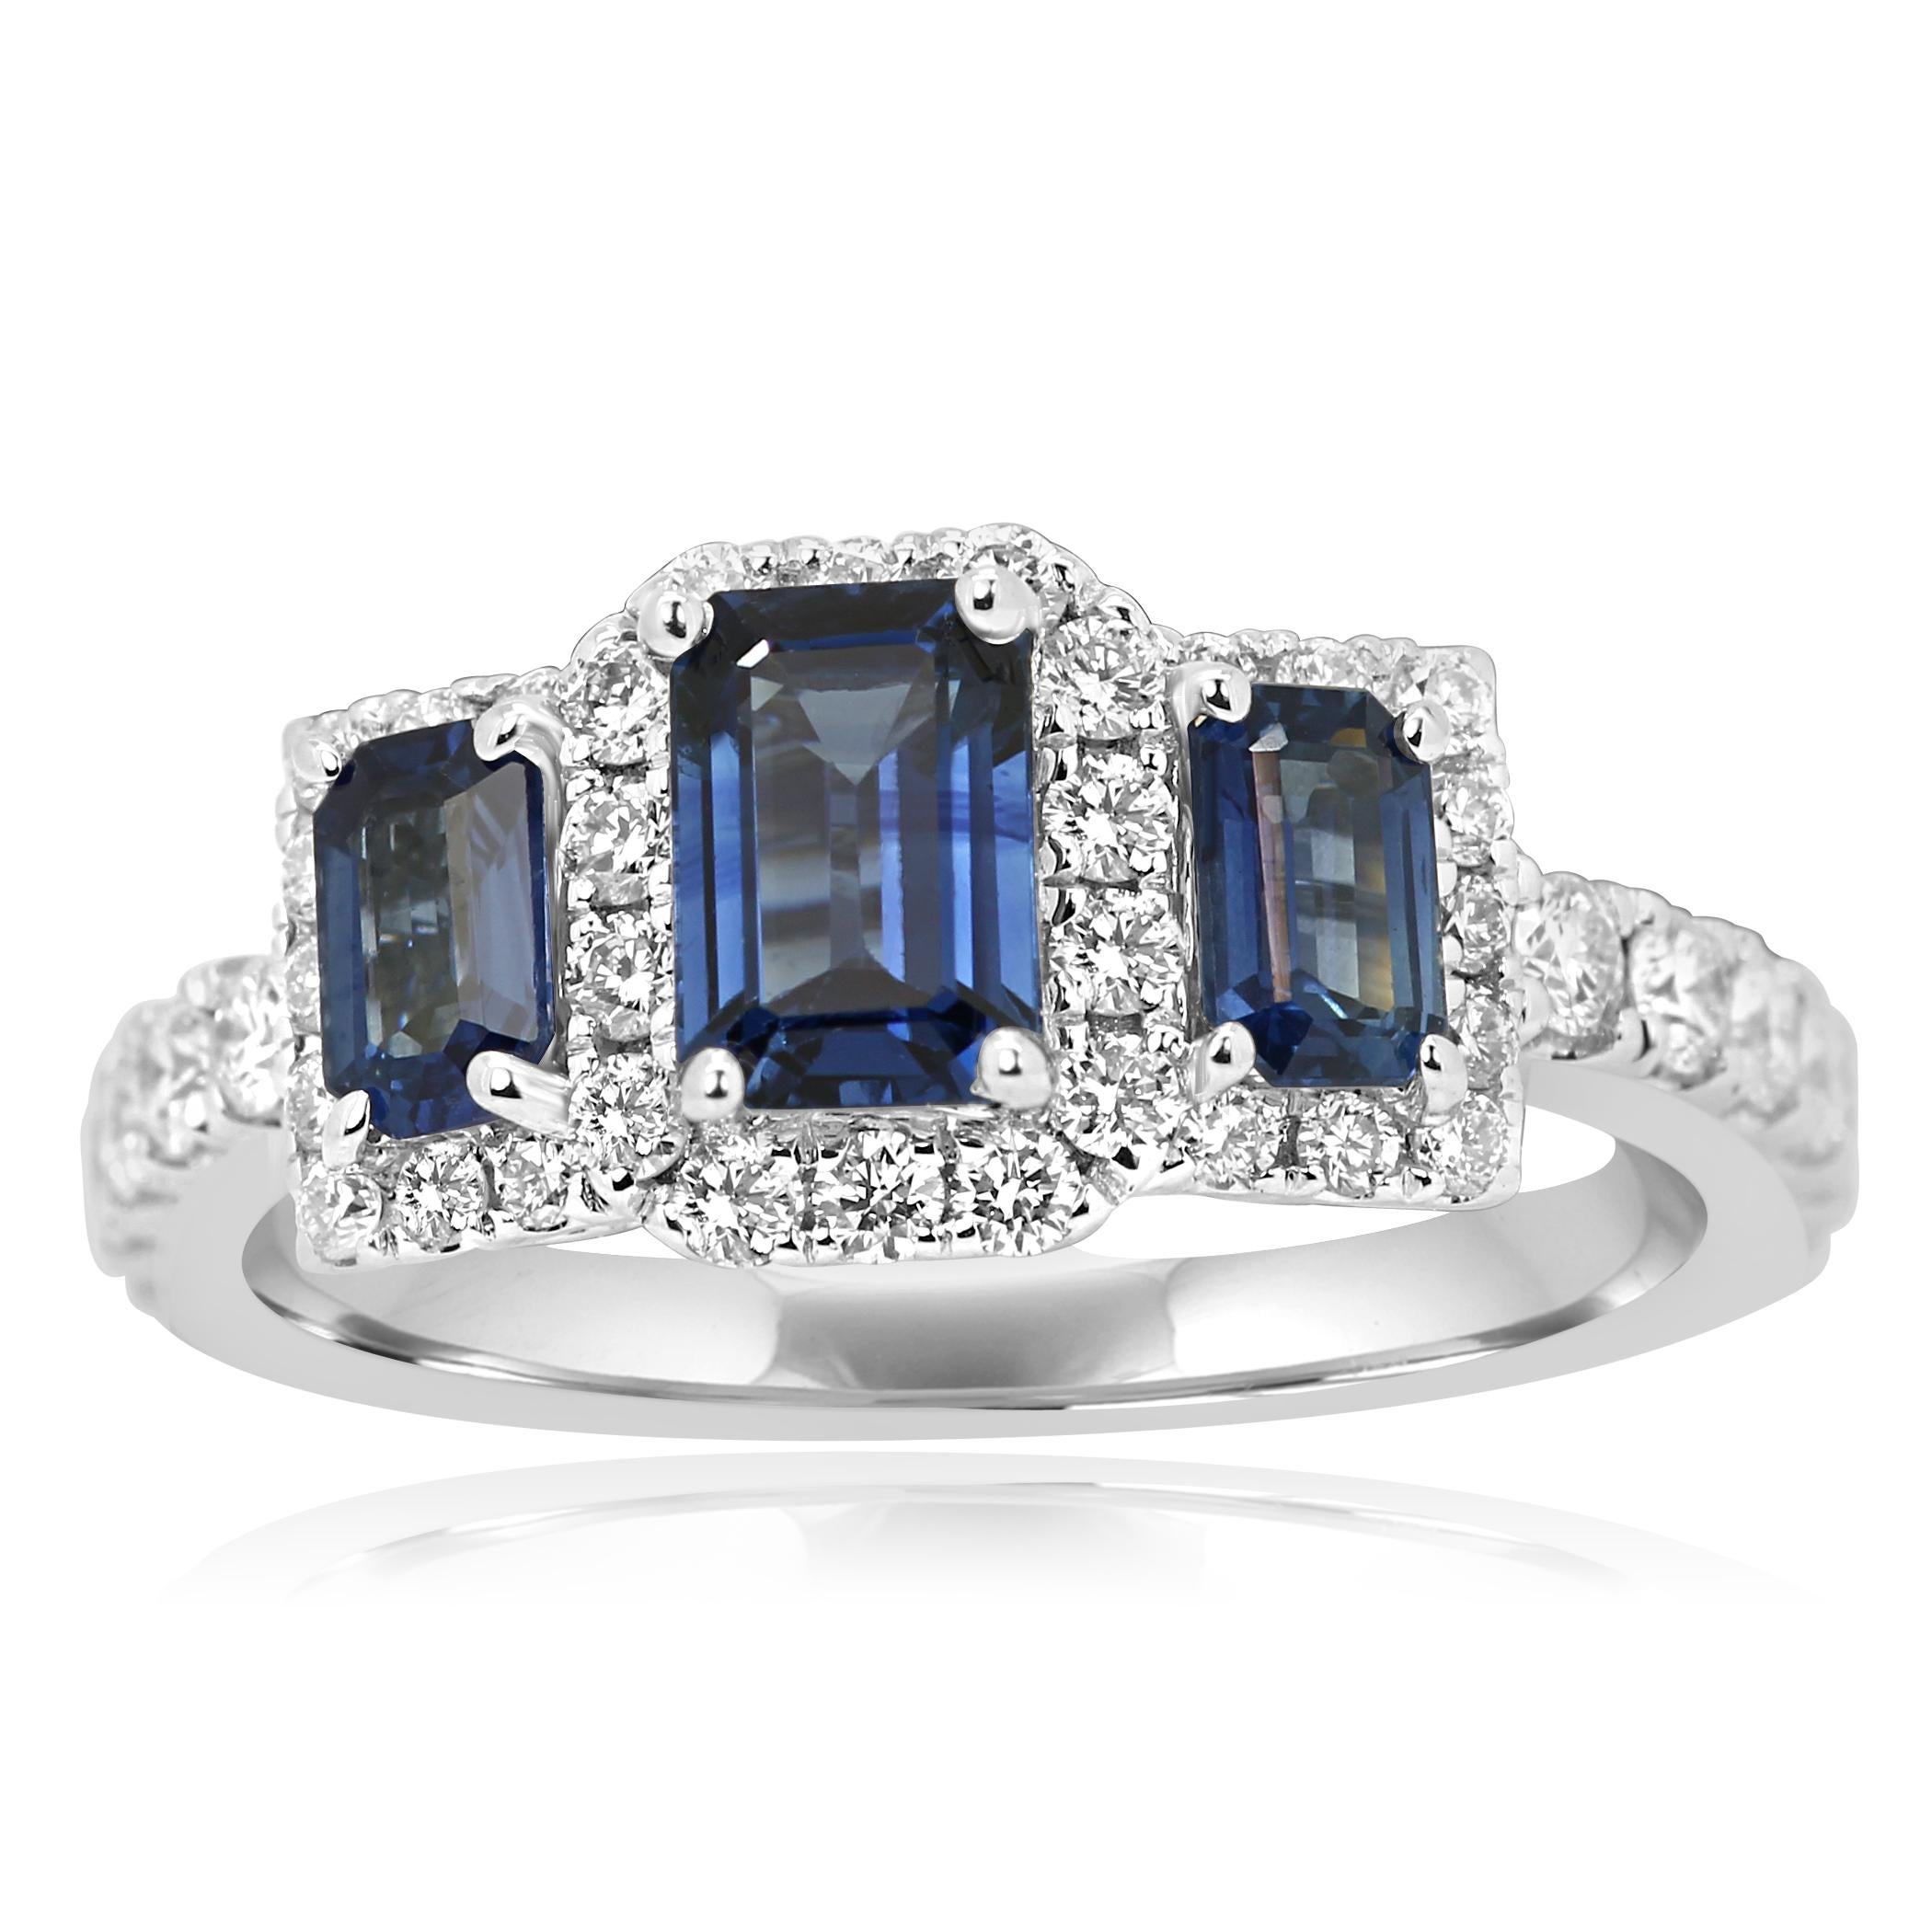 3 Blue Sapphire Emerald Cut 1.39 Carat encircled in a single Halo of Colorless VS-SI Clarity Round Brilliant Diamonds 0.70 Carat Set in stunning 14K White Gold Three Stone Cocktail Ring.

Style available in different price ranges. Prices are based